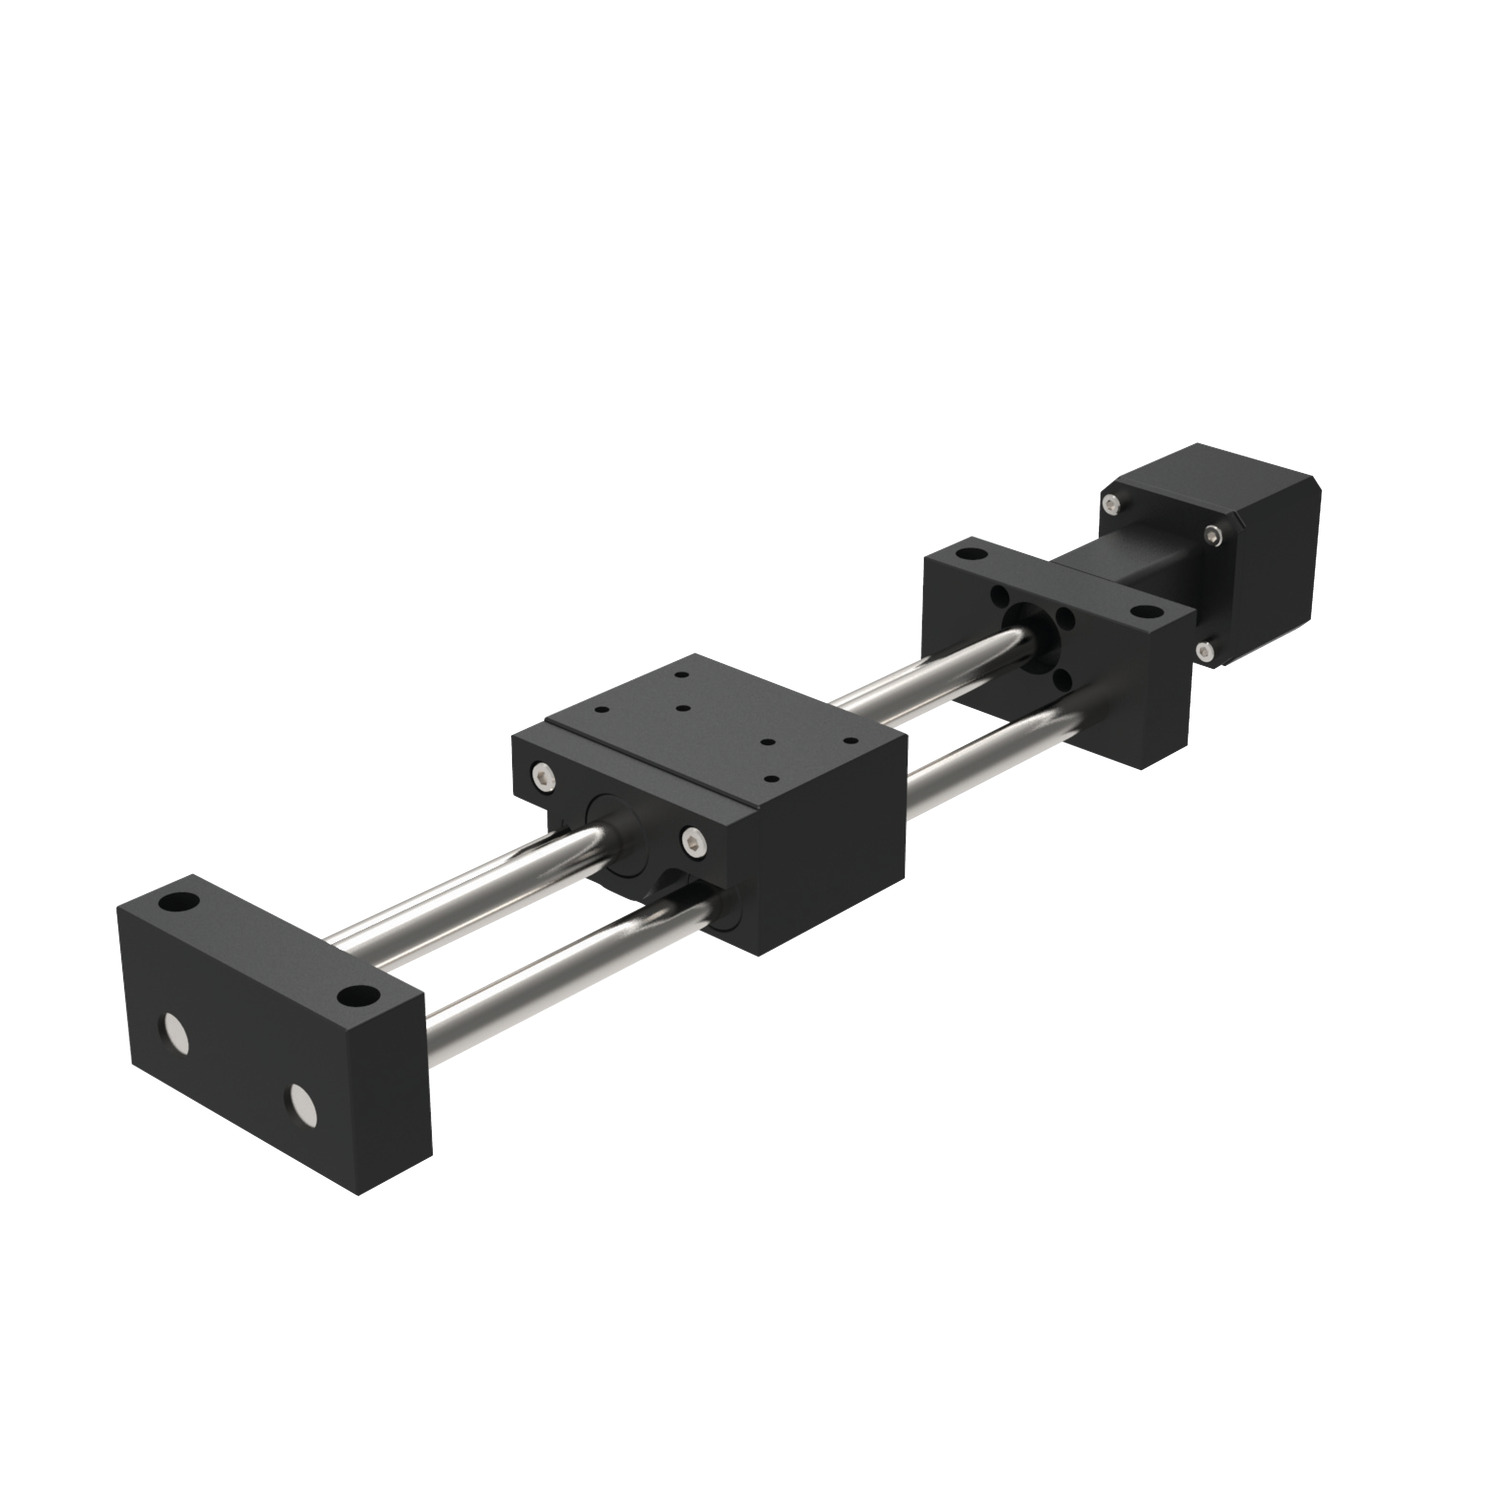 L3510 Motorised Linear Stages